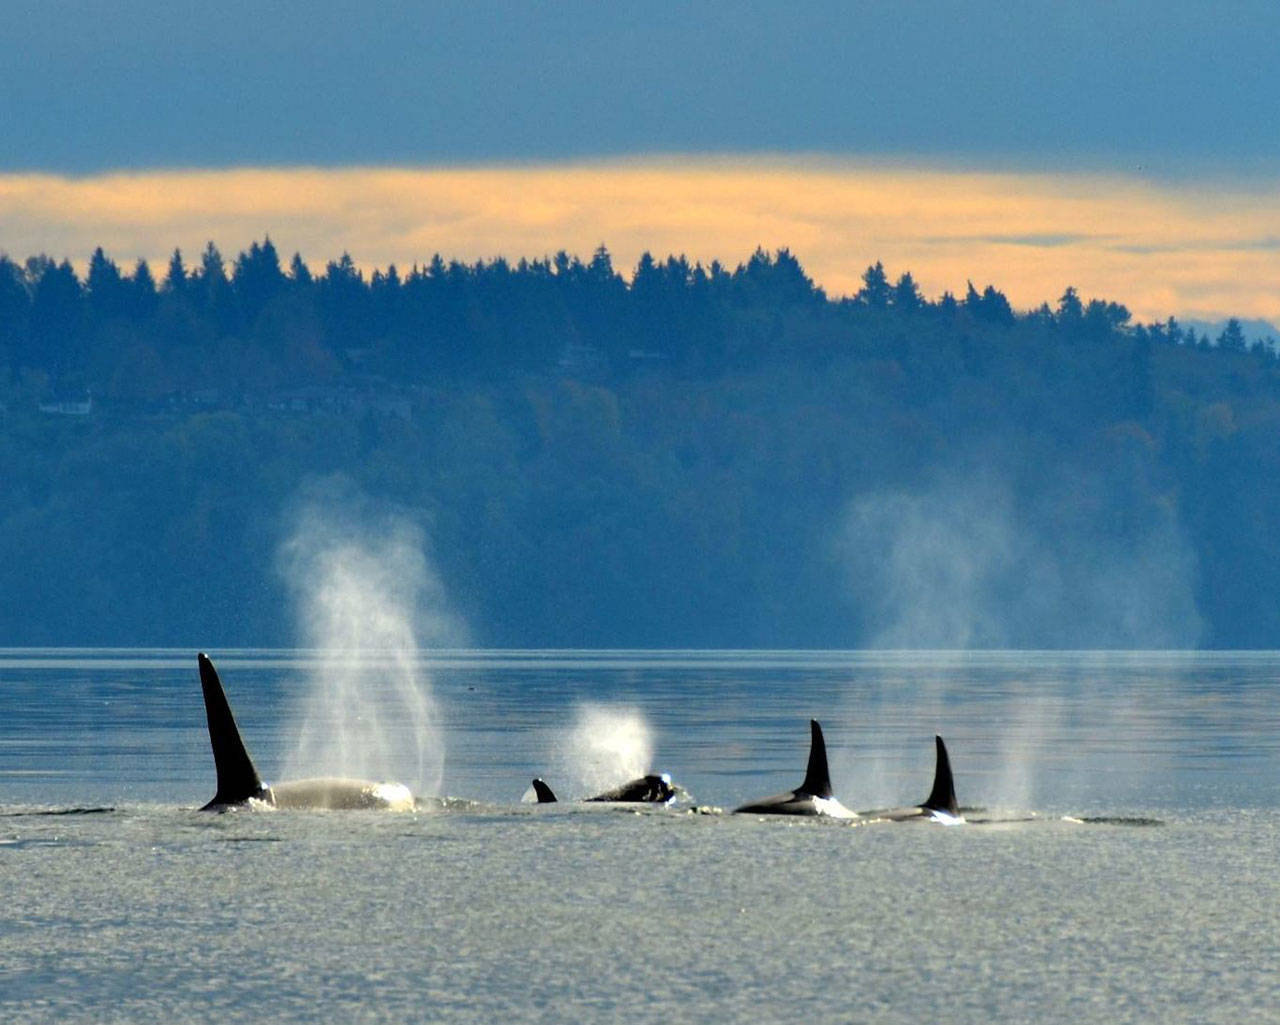 The southern residents can sometimes be spotted off the shores of Vashon. This group, members of J Pod, passed Point Robinson light house on Nov. 7, 2015. They are, from left to right, J27, J49, J37 and J2. (Kelly Keenan Photo)